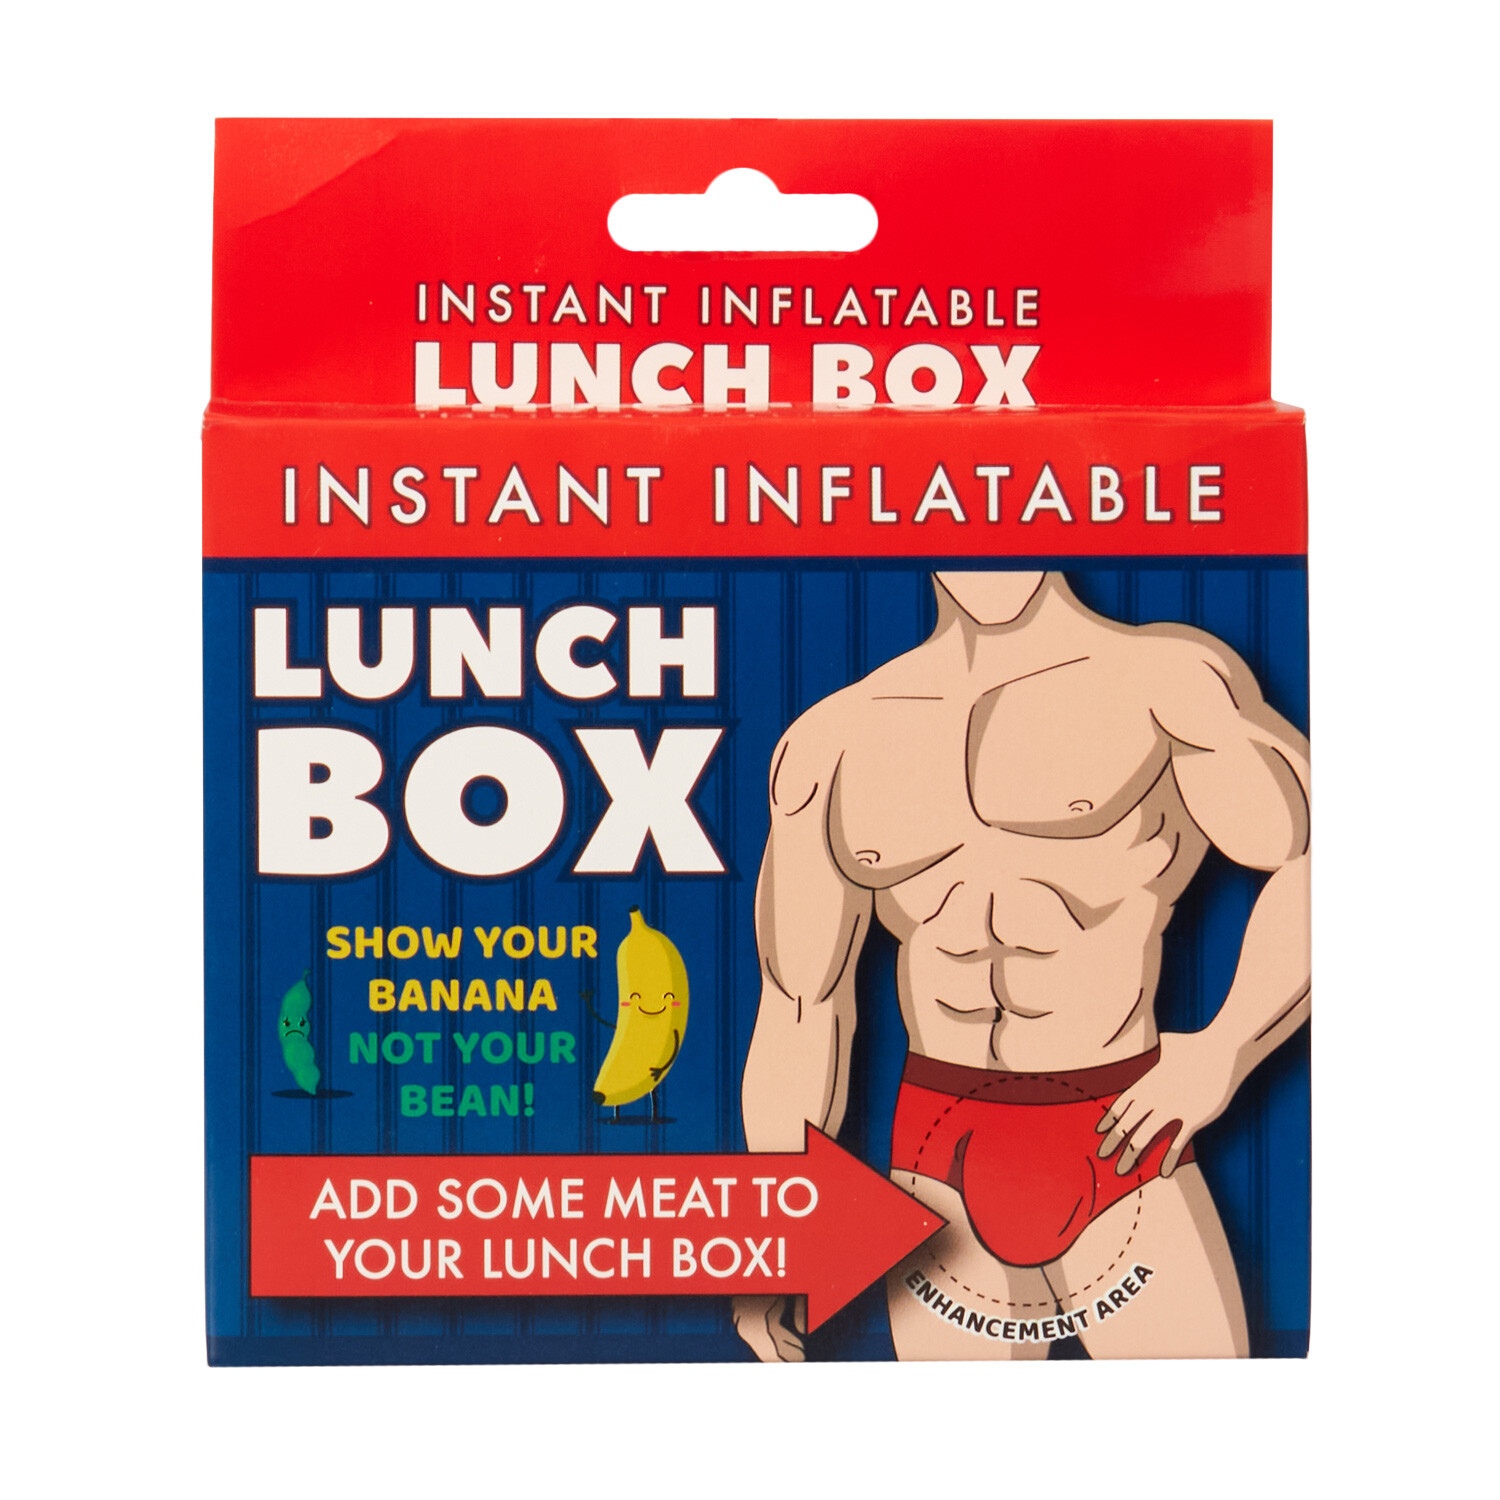 Instant Inflatable Lunch Box Image 1